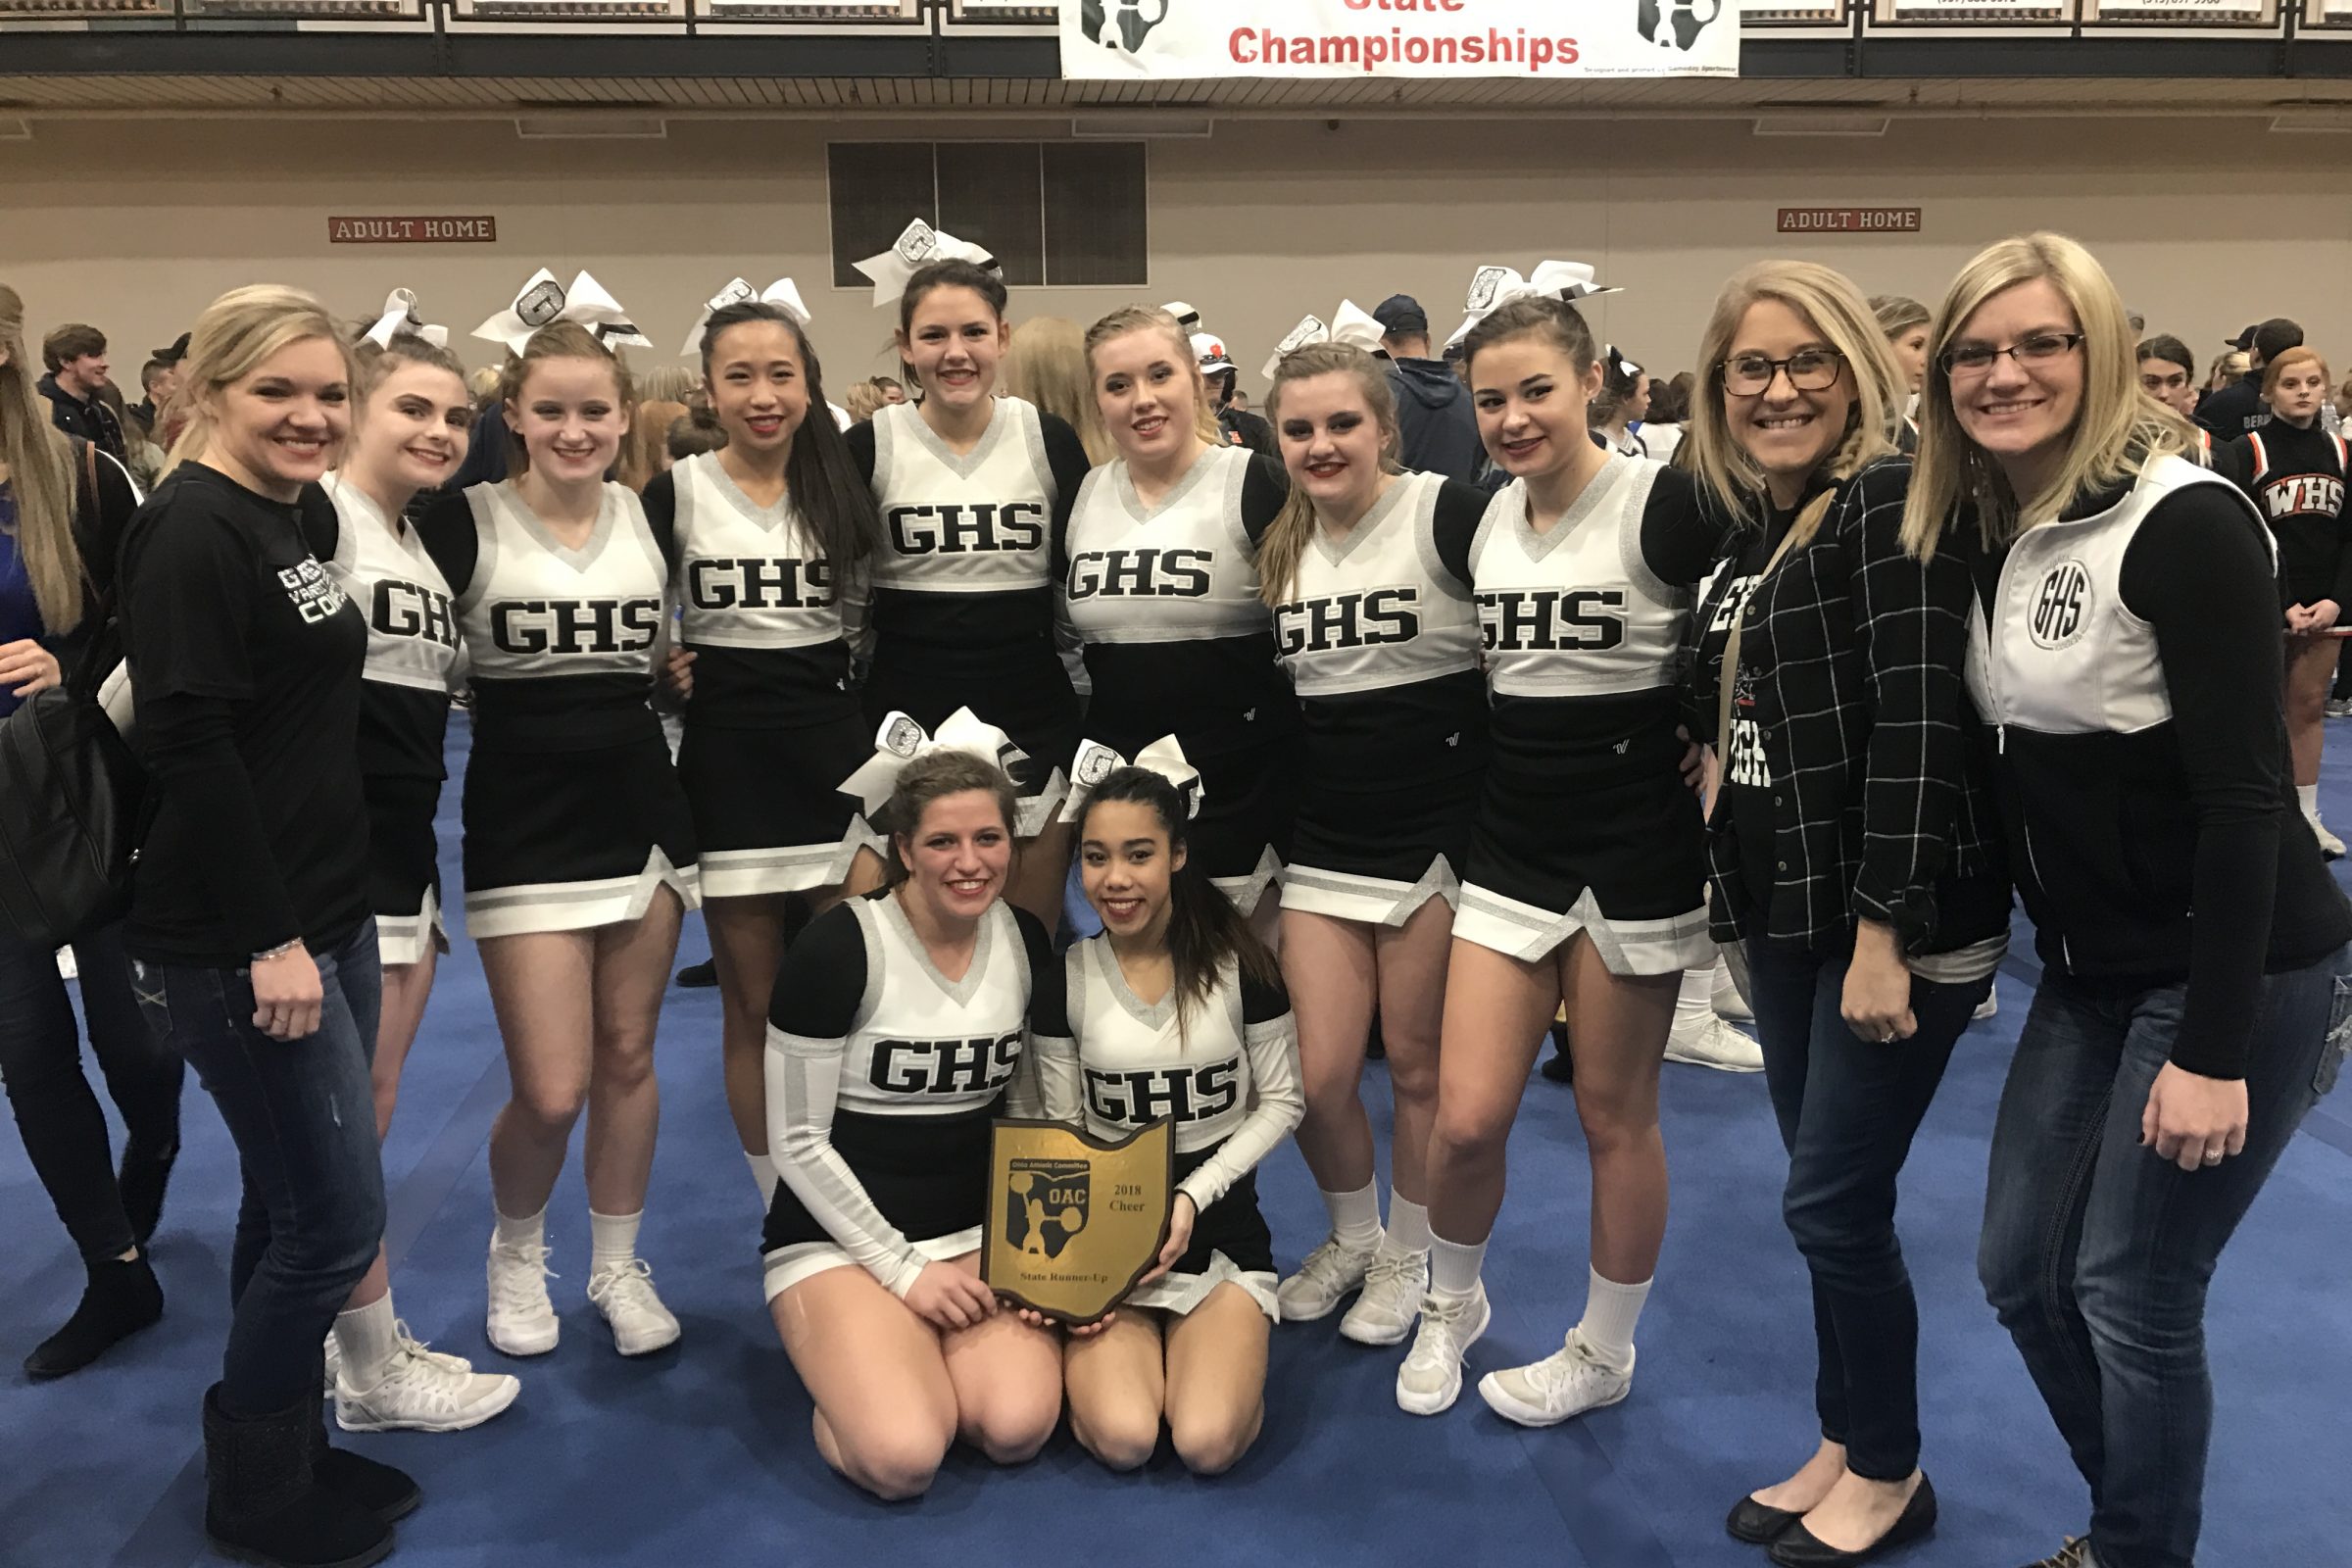 2018 Cheerleading State Championship Results OHIO ATHLETIC COMMITTEE